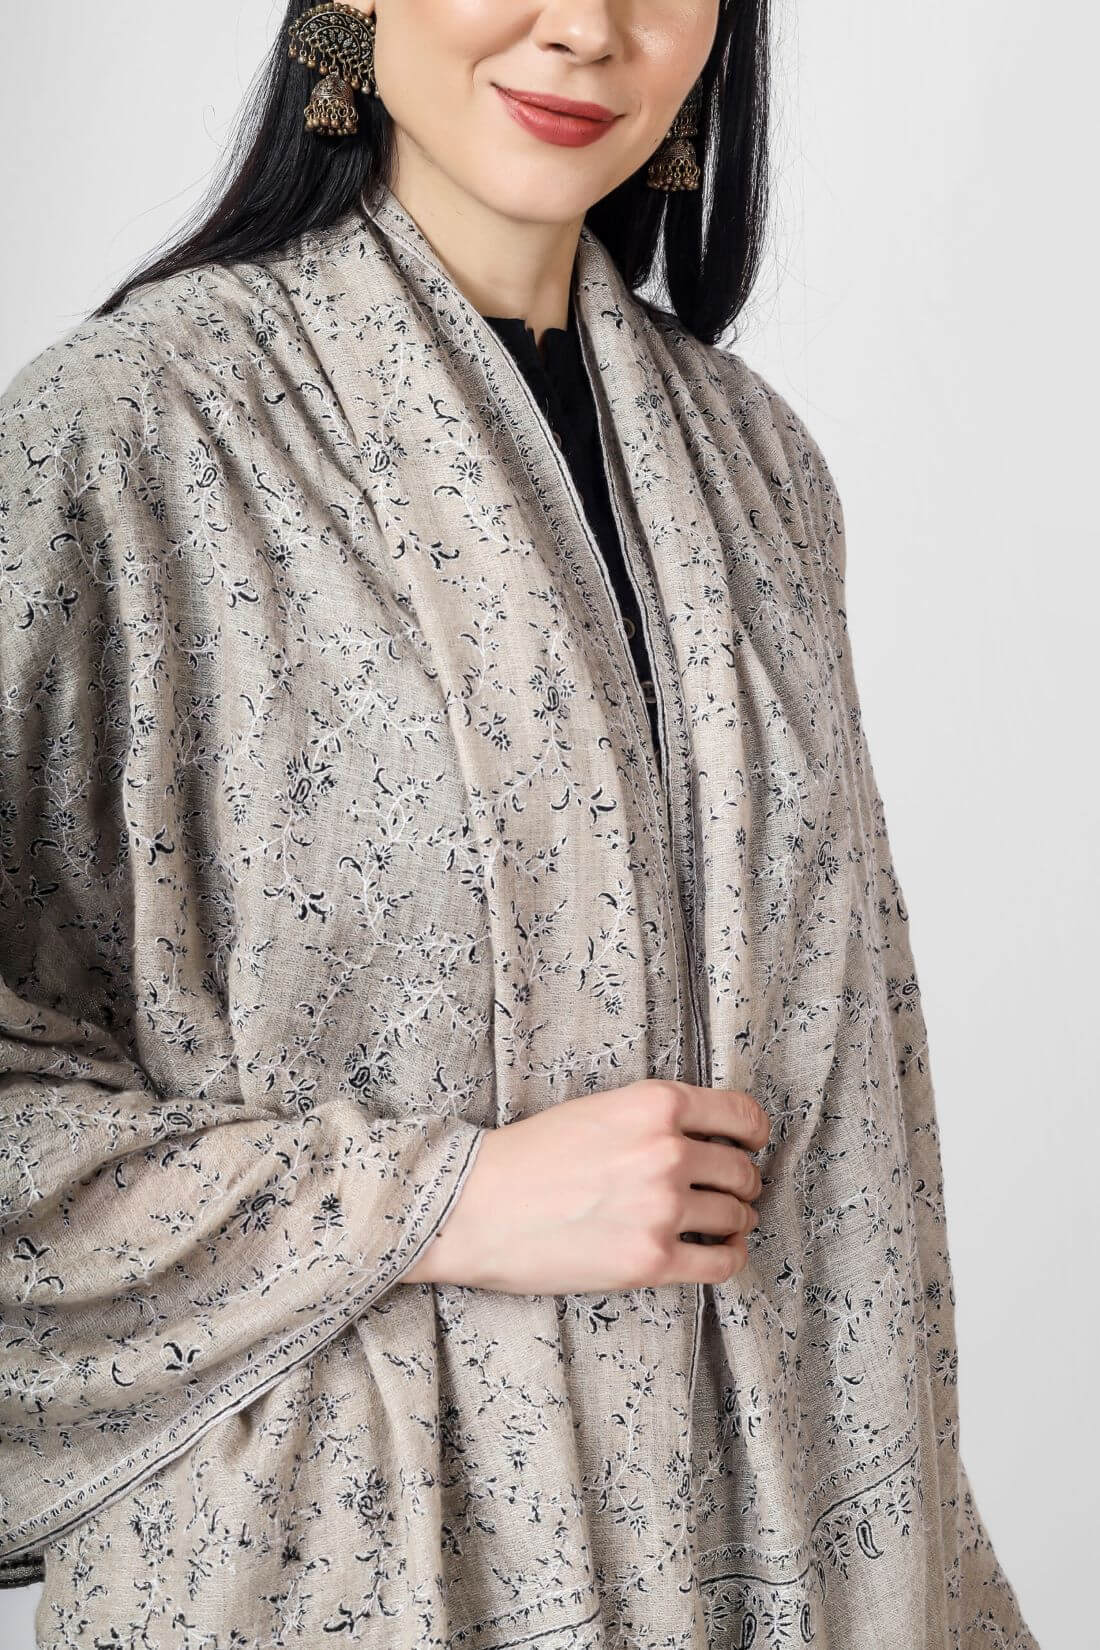 PASHMINA SHAWLS - The Natural Pashmina Jaldaar Black & White Embroidered Shawl is an elegant and classic piece that is appropriate for any setting. Anybody who values luxury and taste must own it because of the premium fabrics, beautiful needlework, and distinctive design.